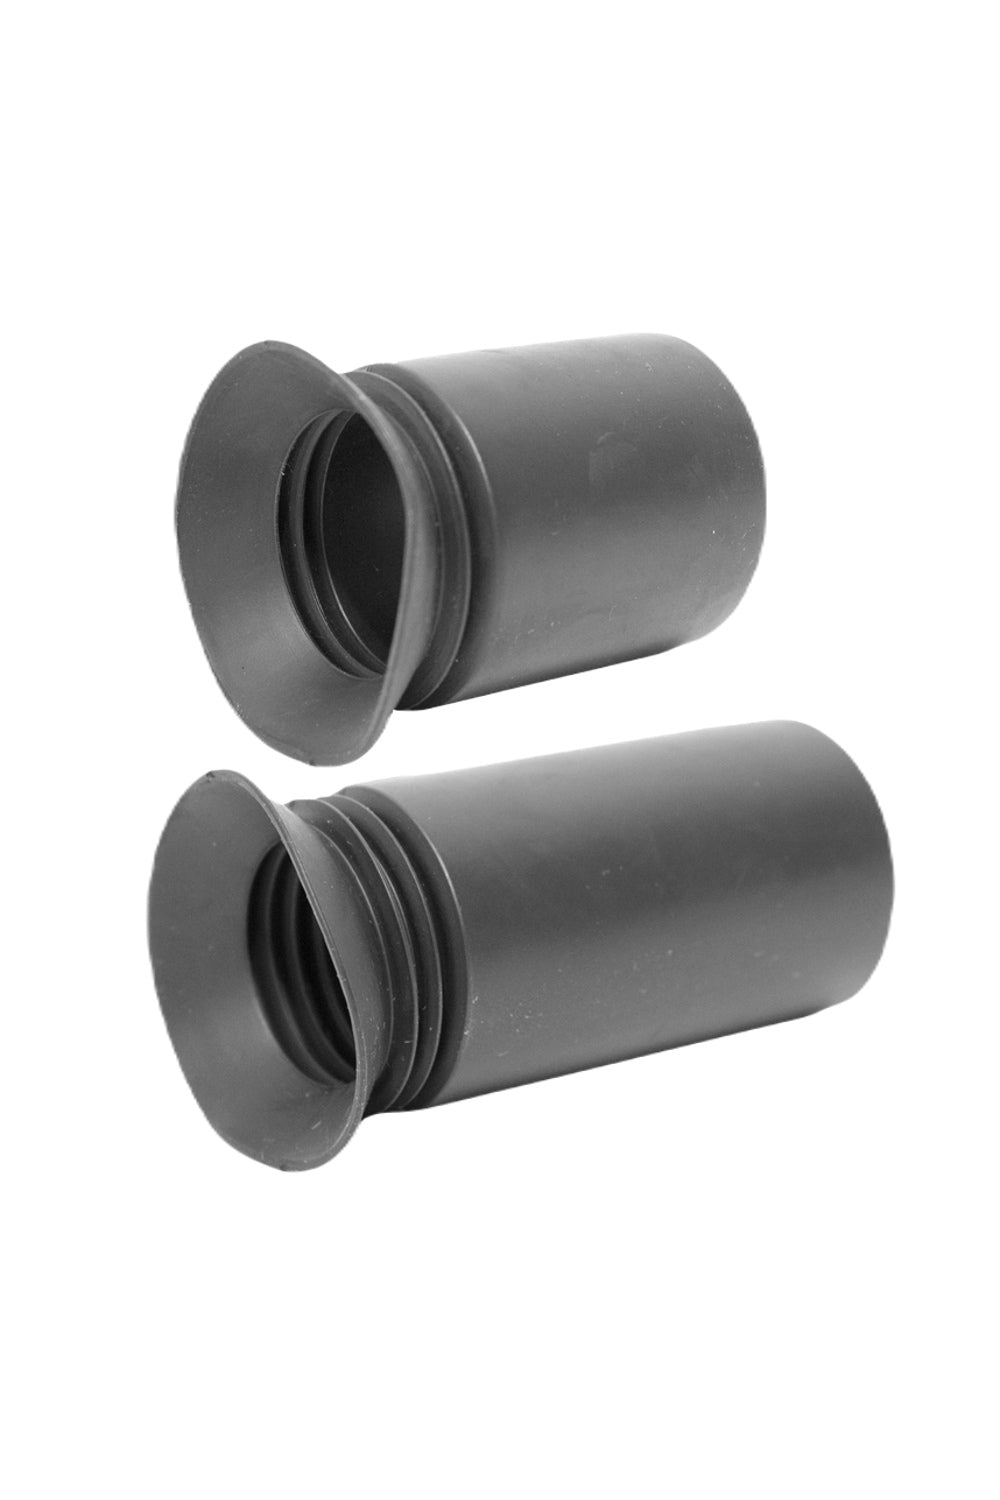 Bisley Scope Extension Eyepiece In 60mm and 90mm